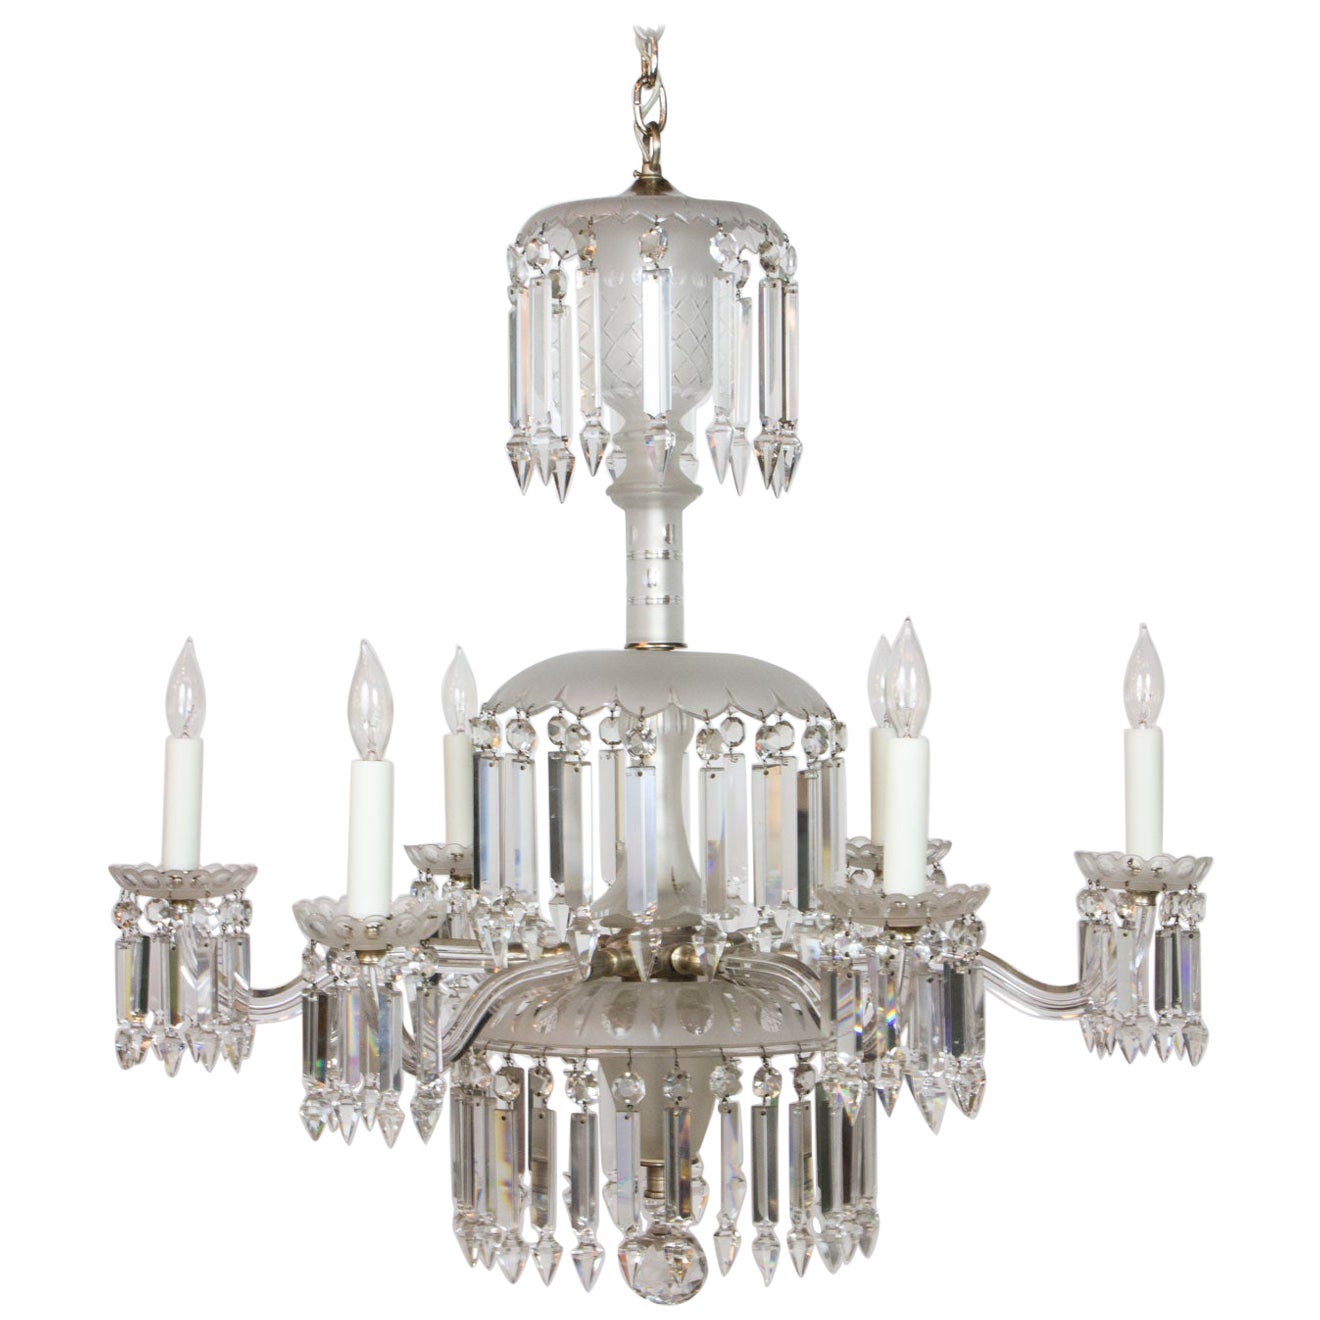 19th Century 6 Arm Frosted Crystal Gasolier For Sale